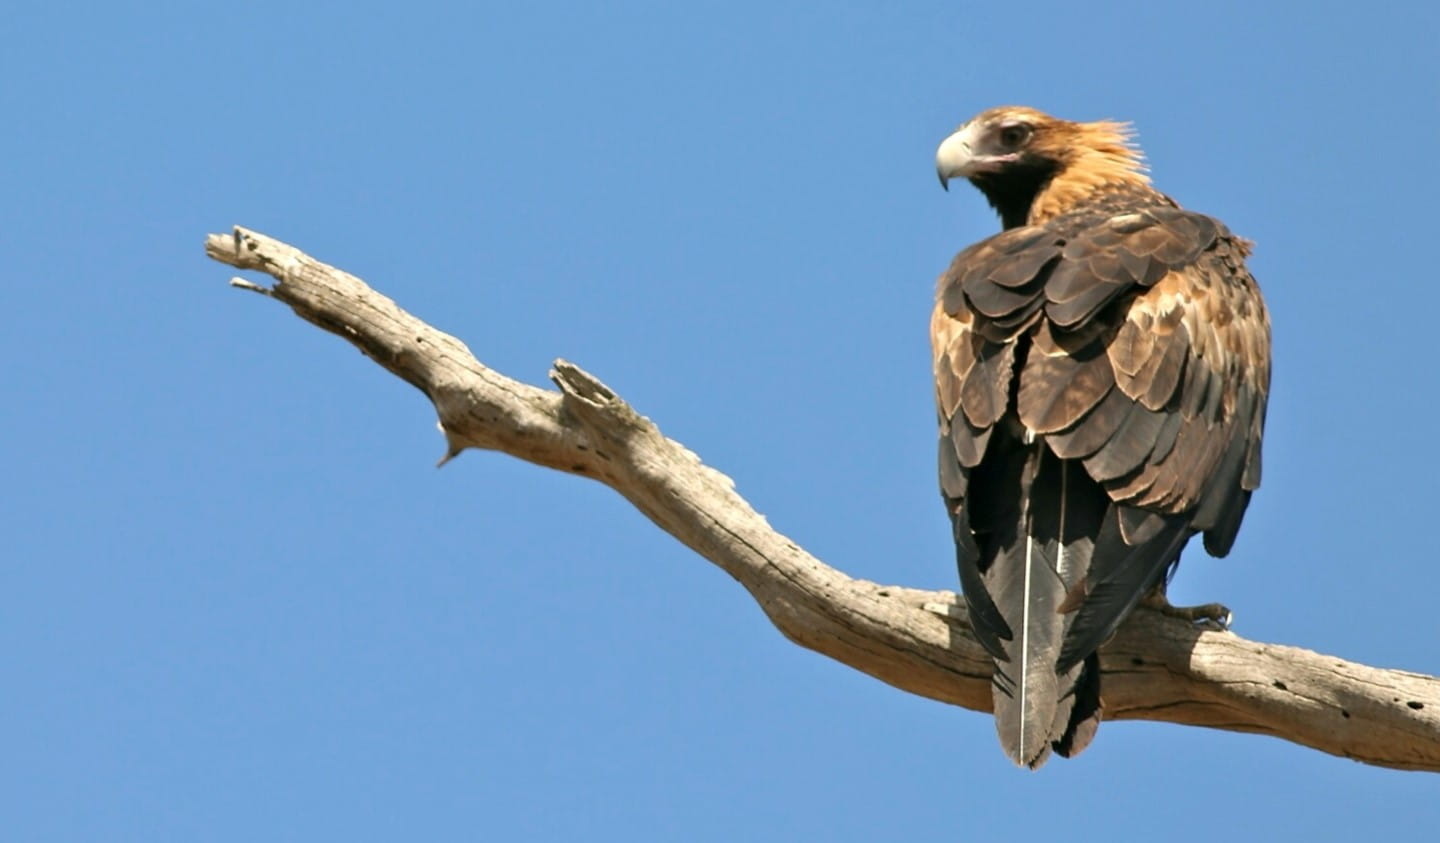 A Wedge-Tailed Eagle looks over its shoulder.